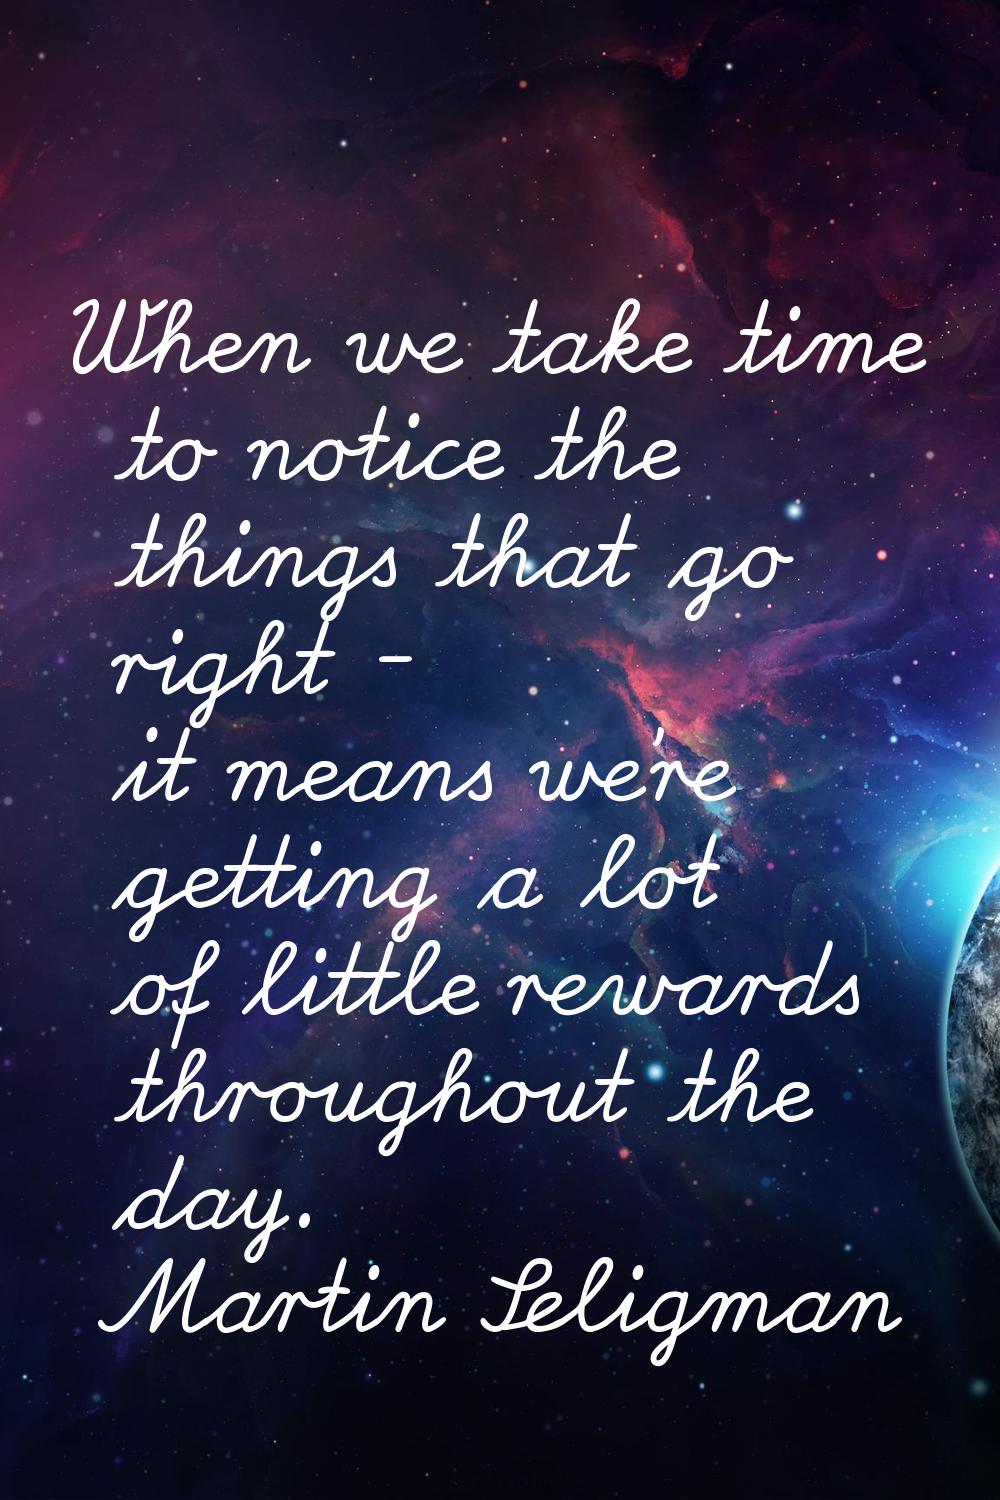 When we take time to notice the things that go right - it means we're getting a lot of little rewar